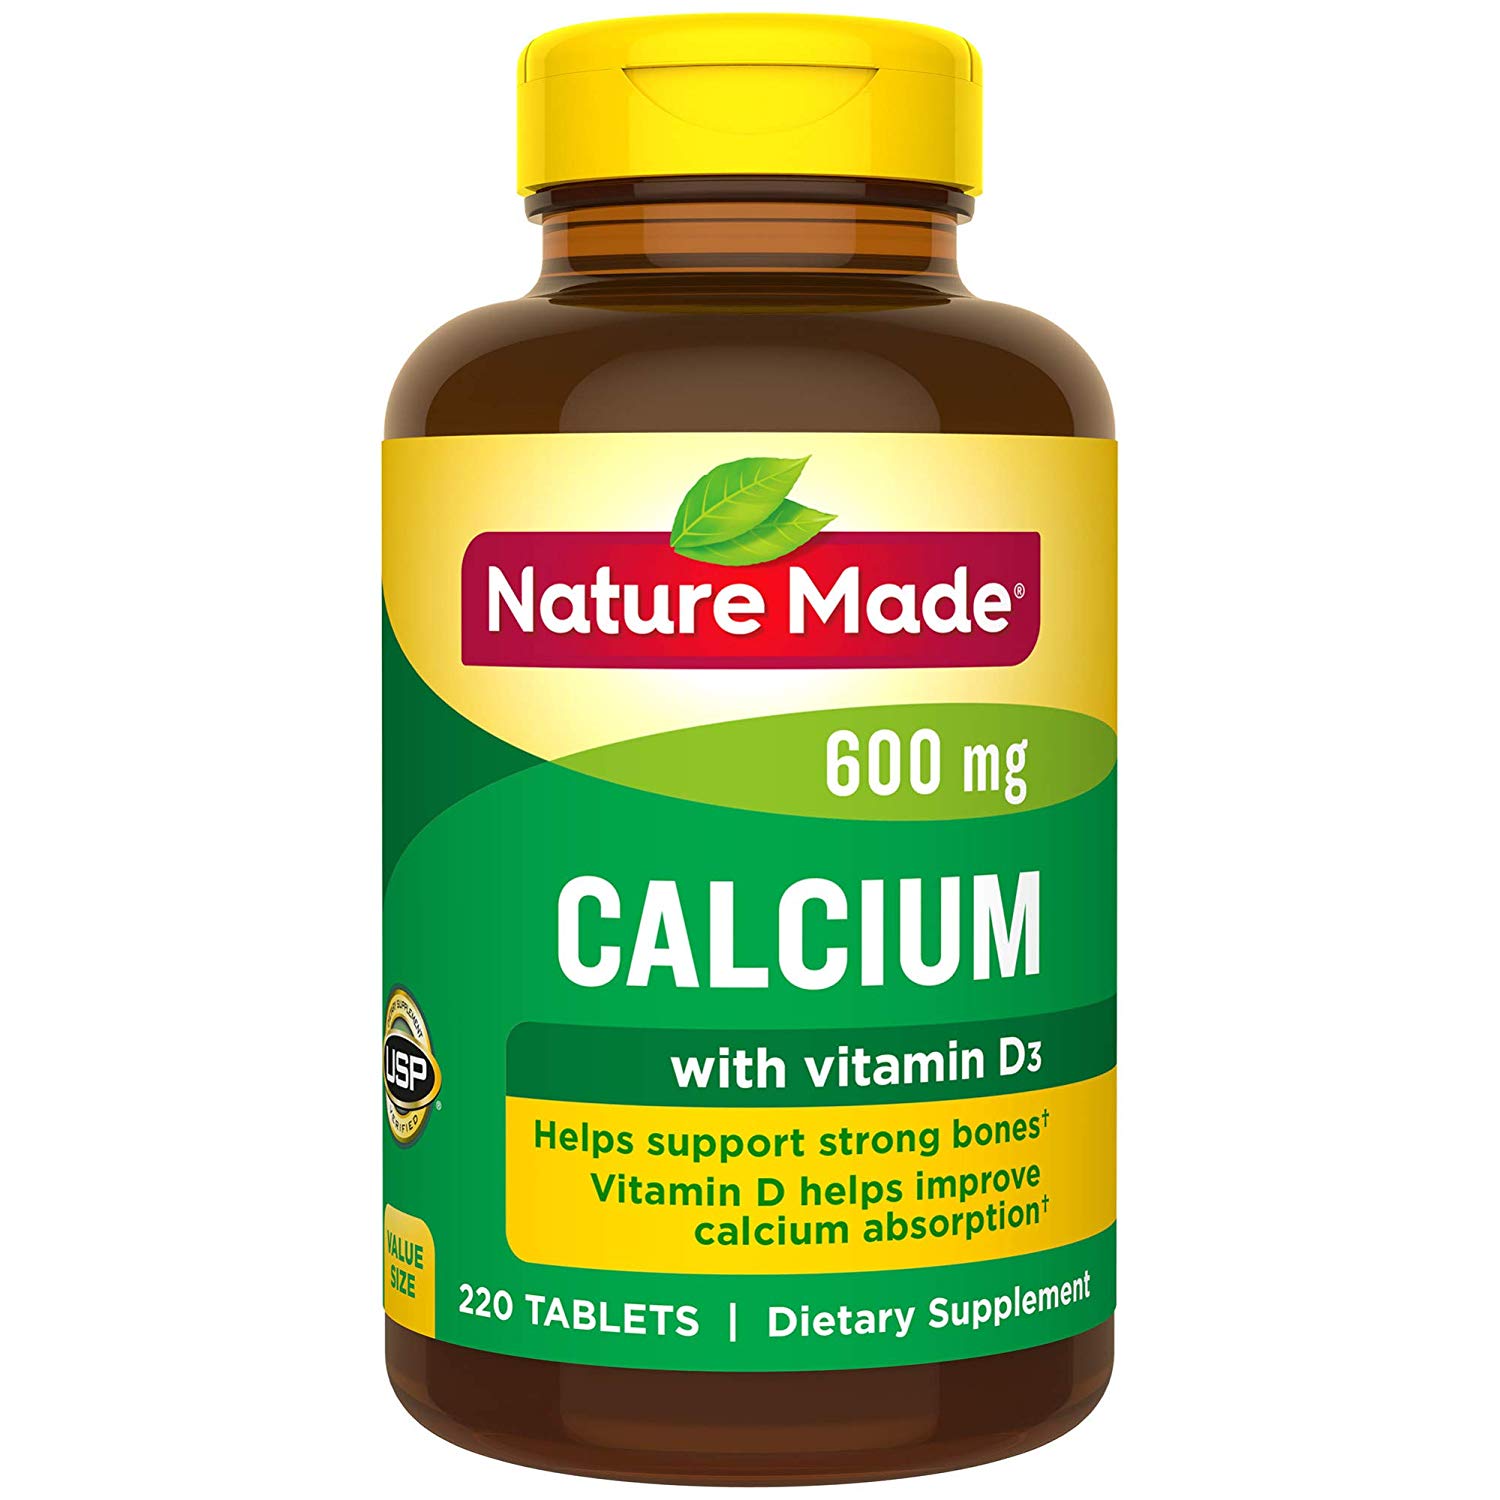 Nature Made Calcium 600 Mg, with Vitamin D3, Value Size, 220-Count, only $8.39, free shipping after clipping coupon and using SS